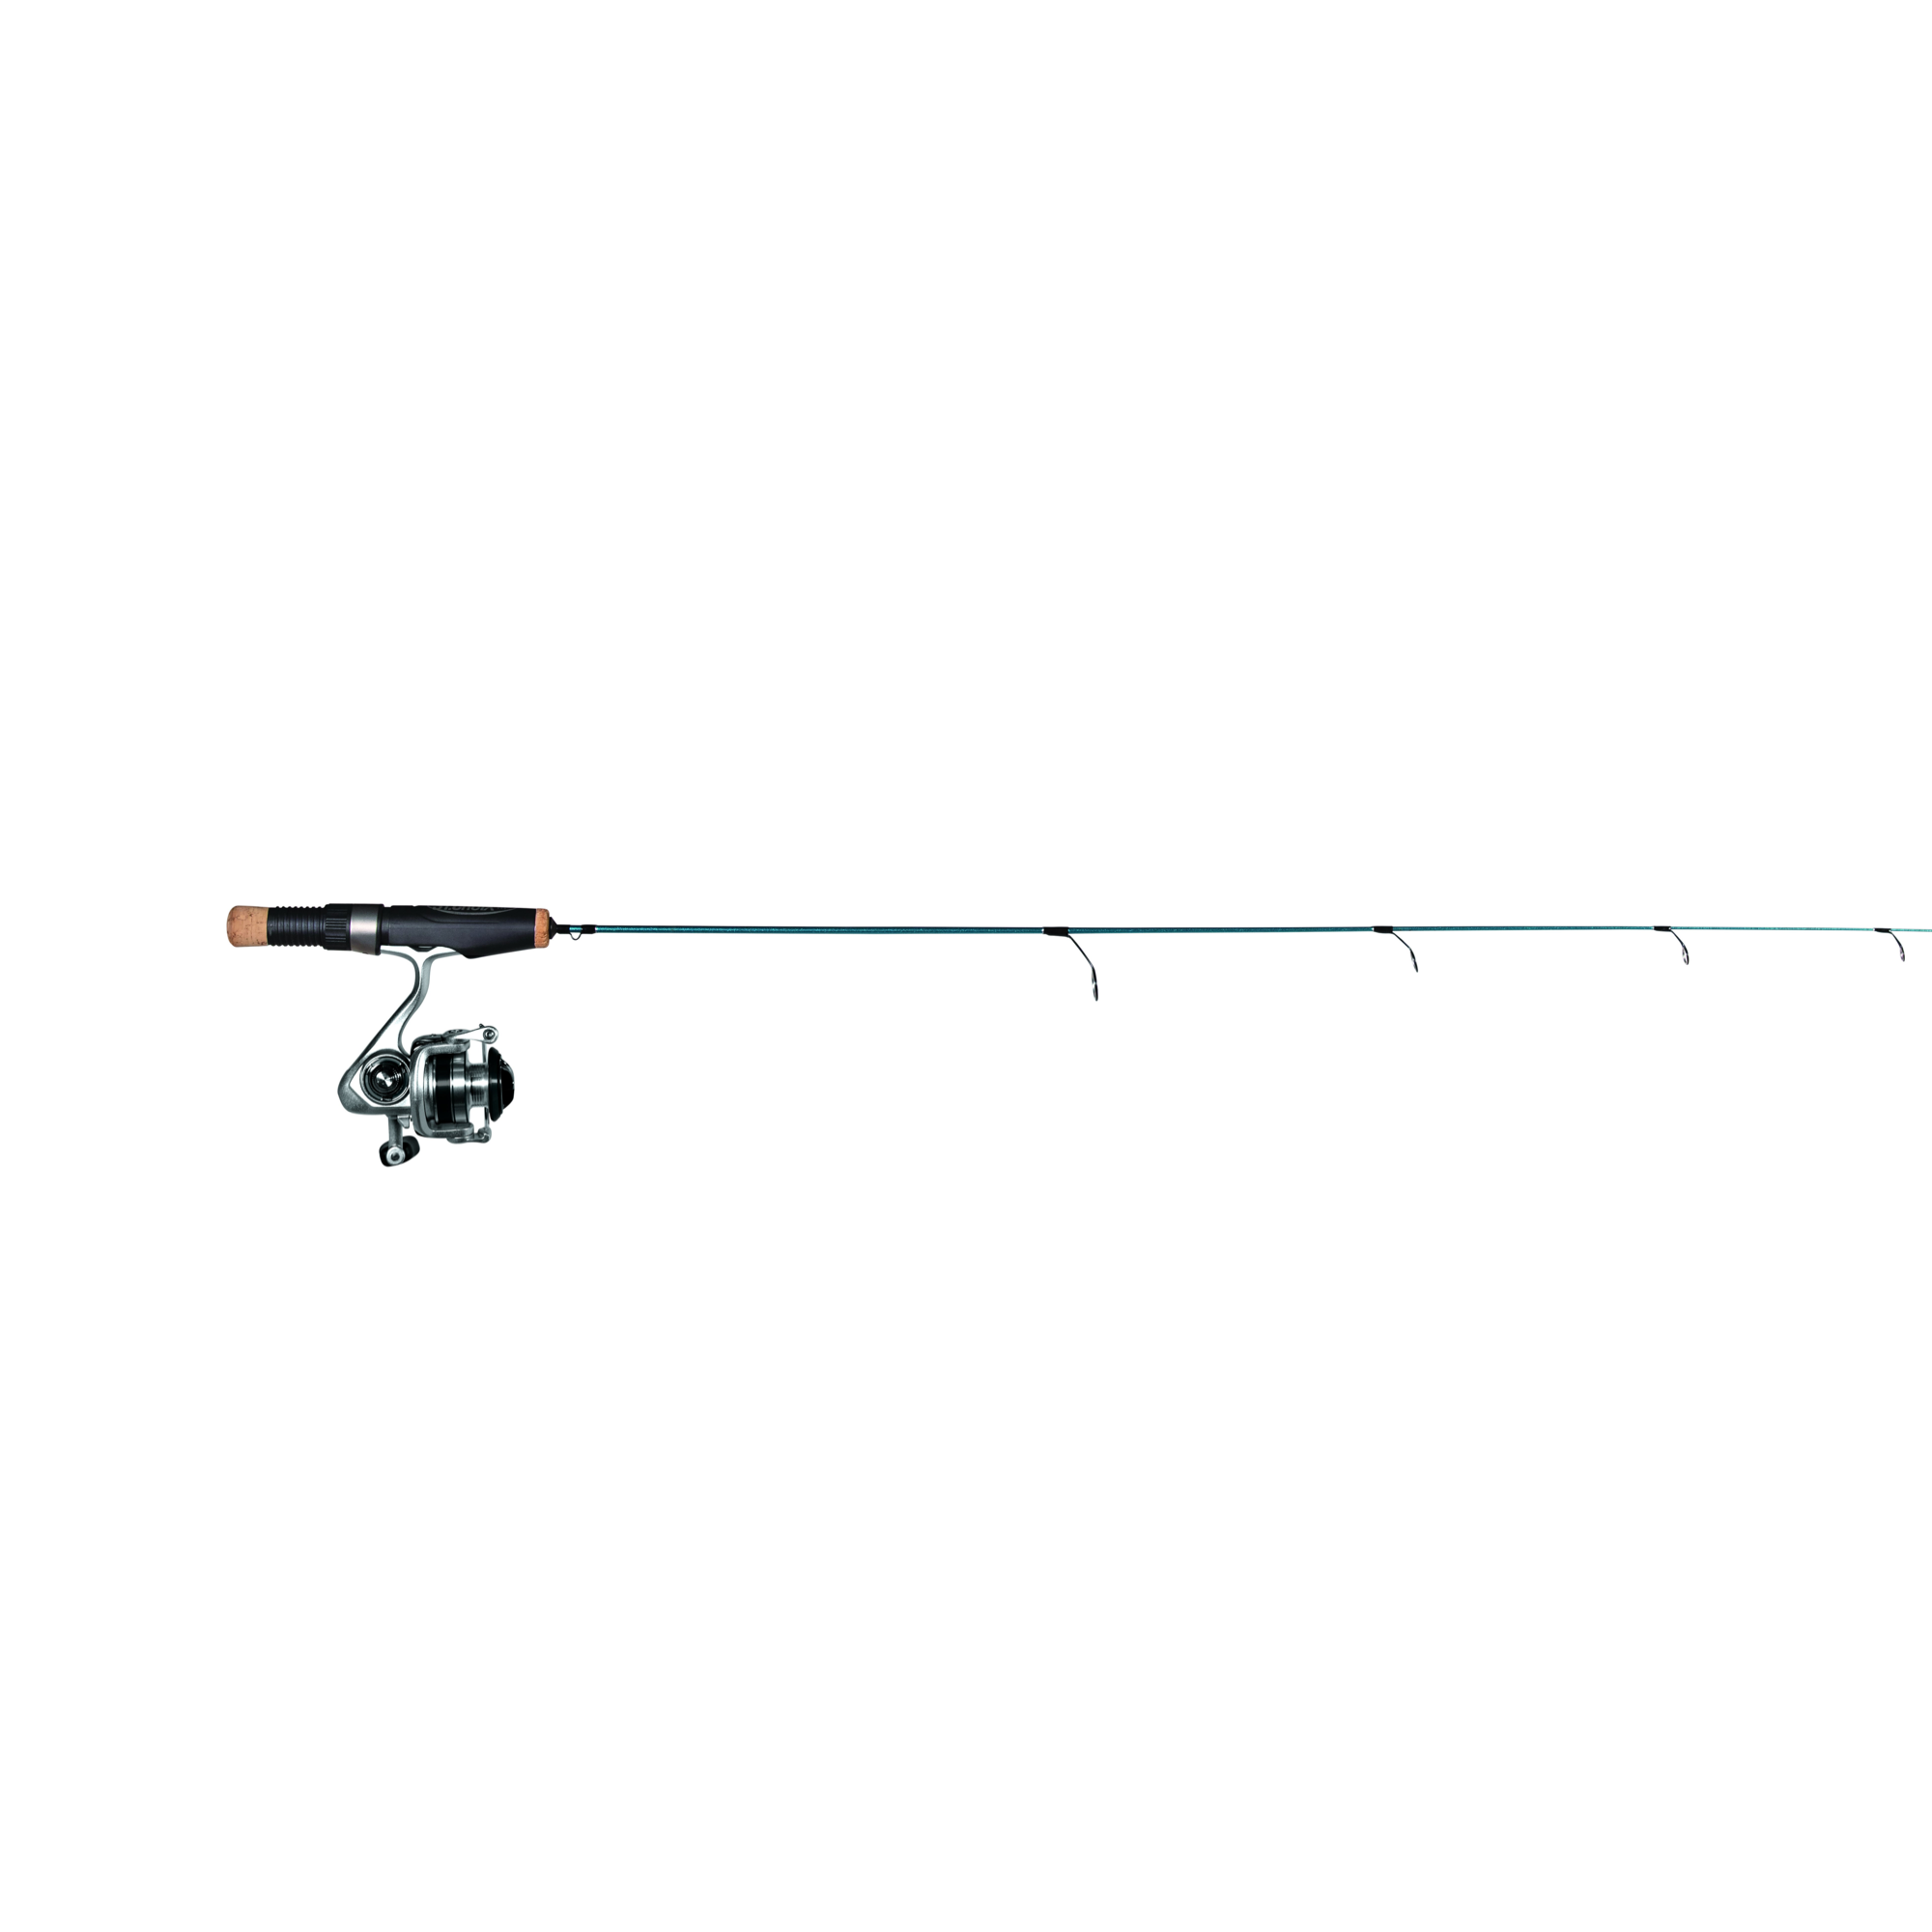 DELUXE ICE ROD RACK - HOLDS 12 ROD COMBOS